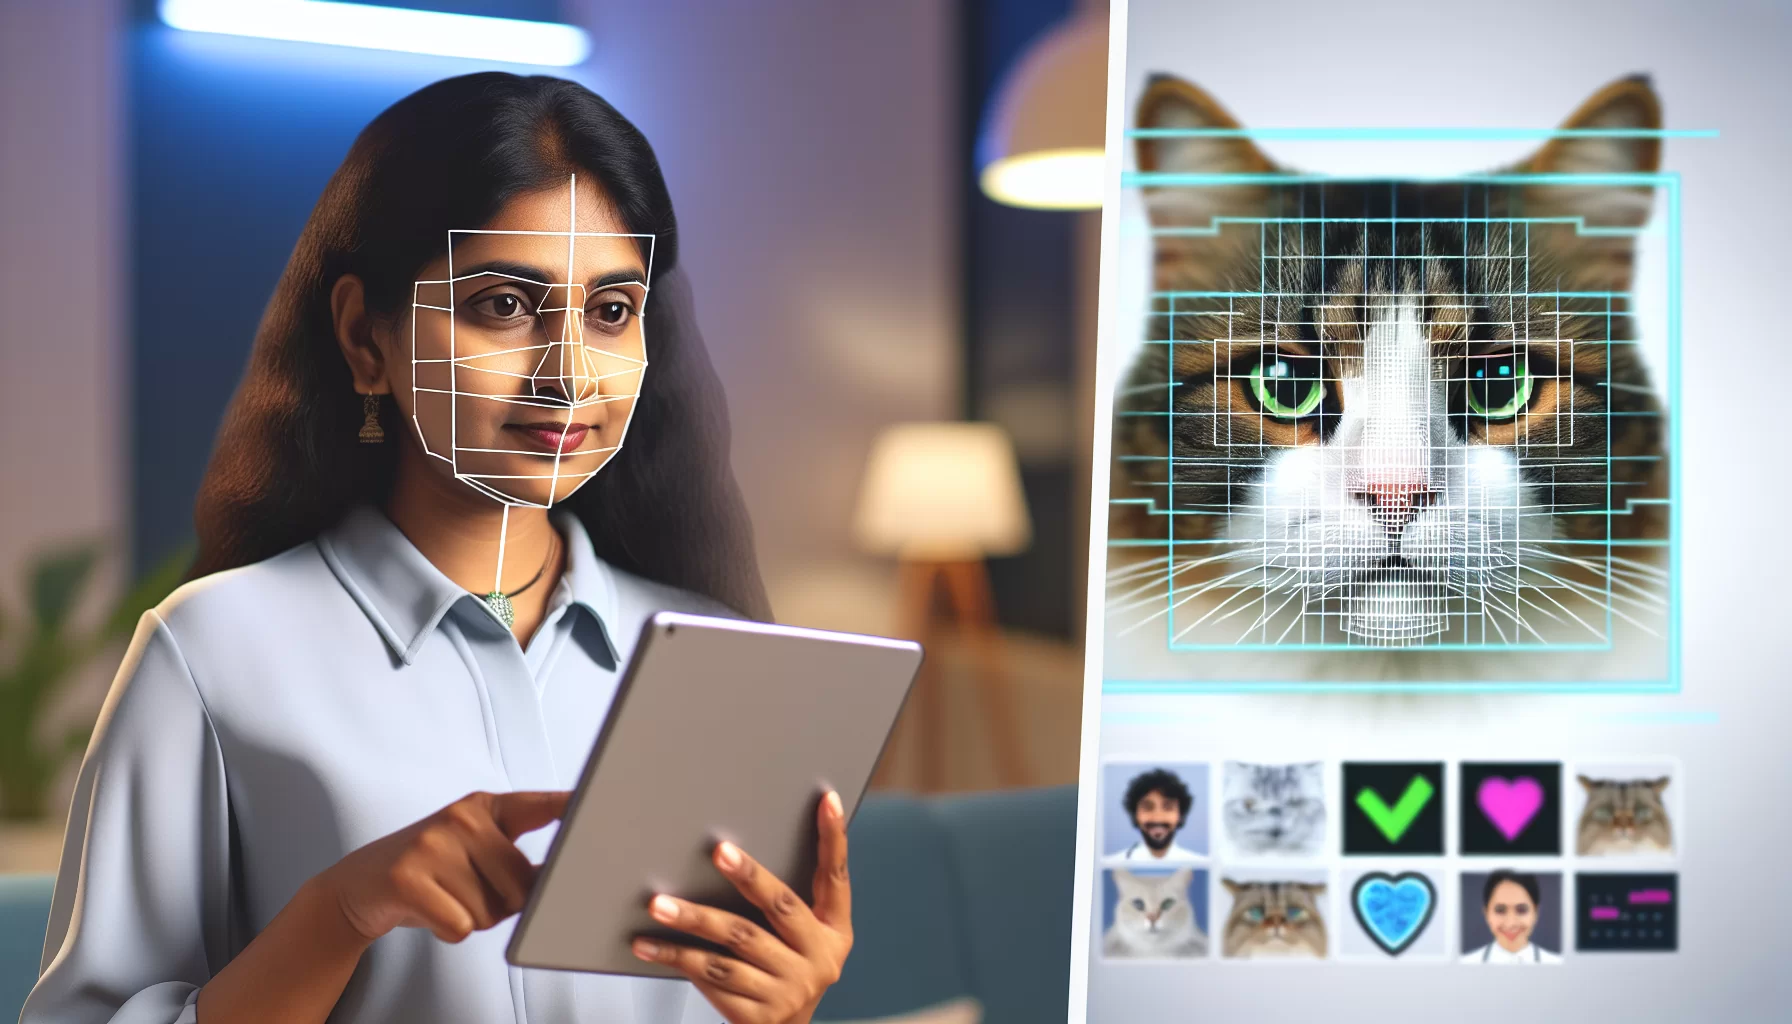 Revolutionizing pet care: the Japanese app detecting pain in cats using facial recognition